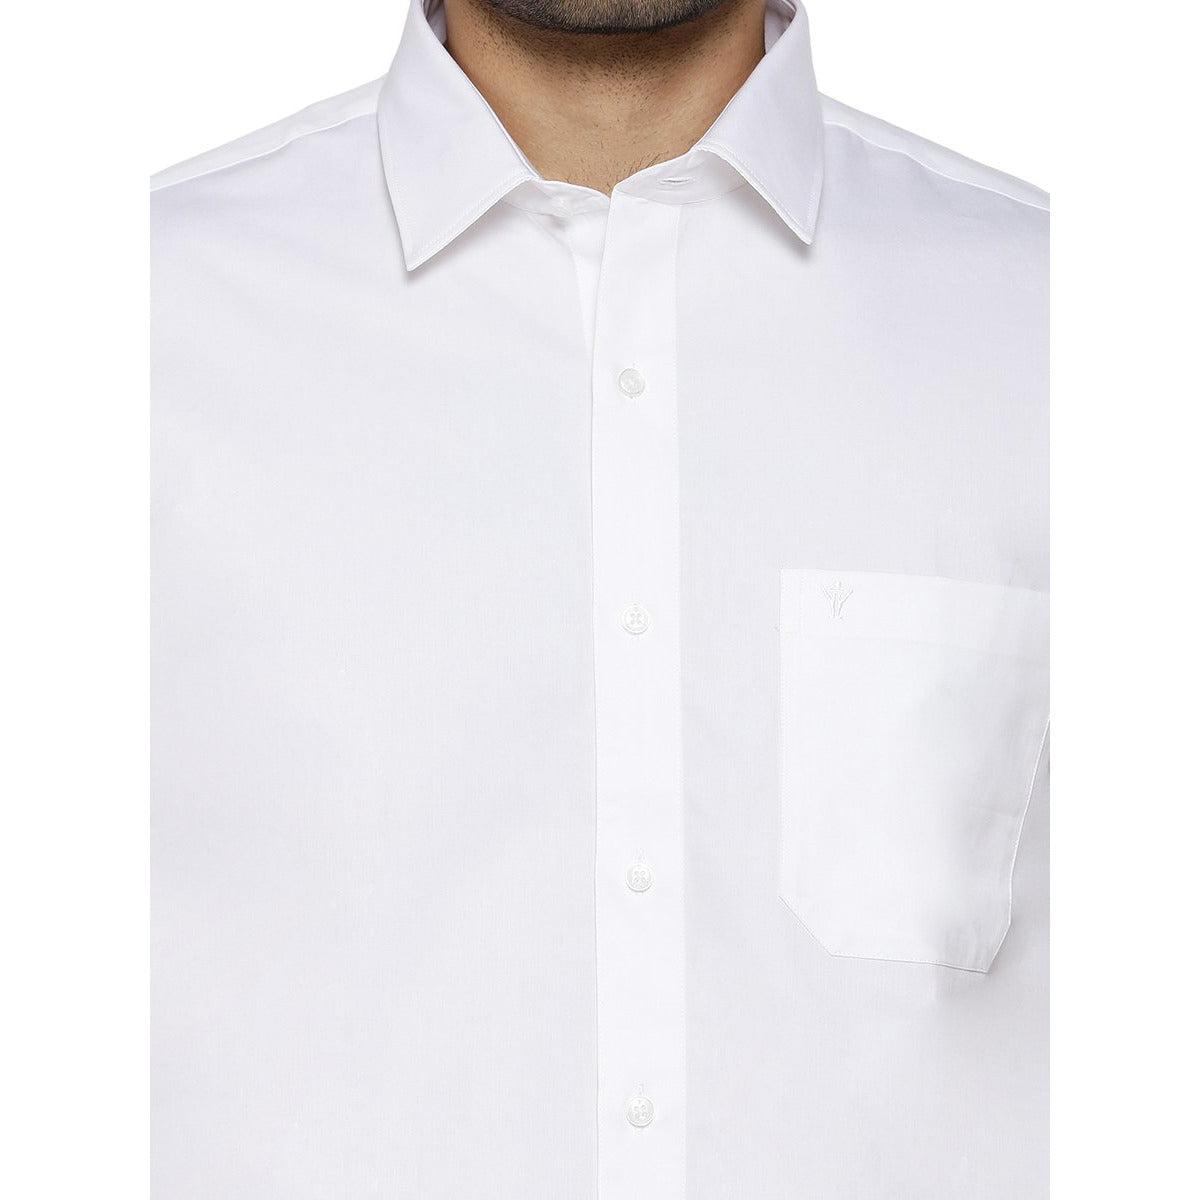 Mens 100% Cotton White Shirt Half Sleeves Classic Cotton-Zoom view